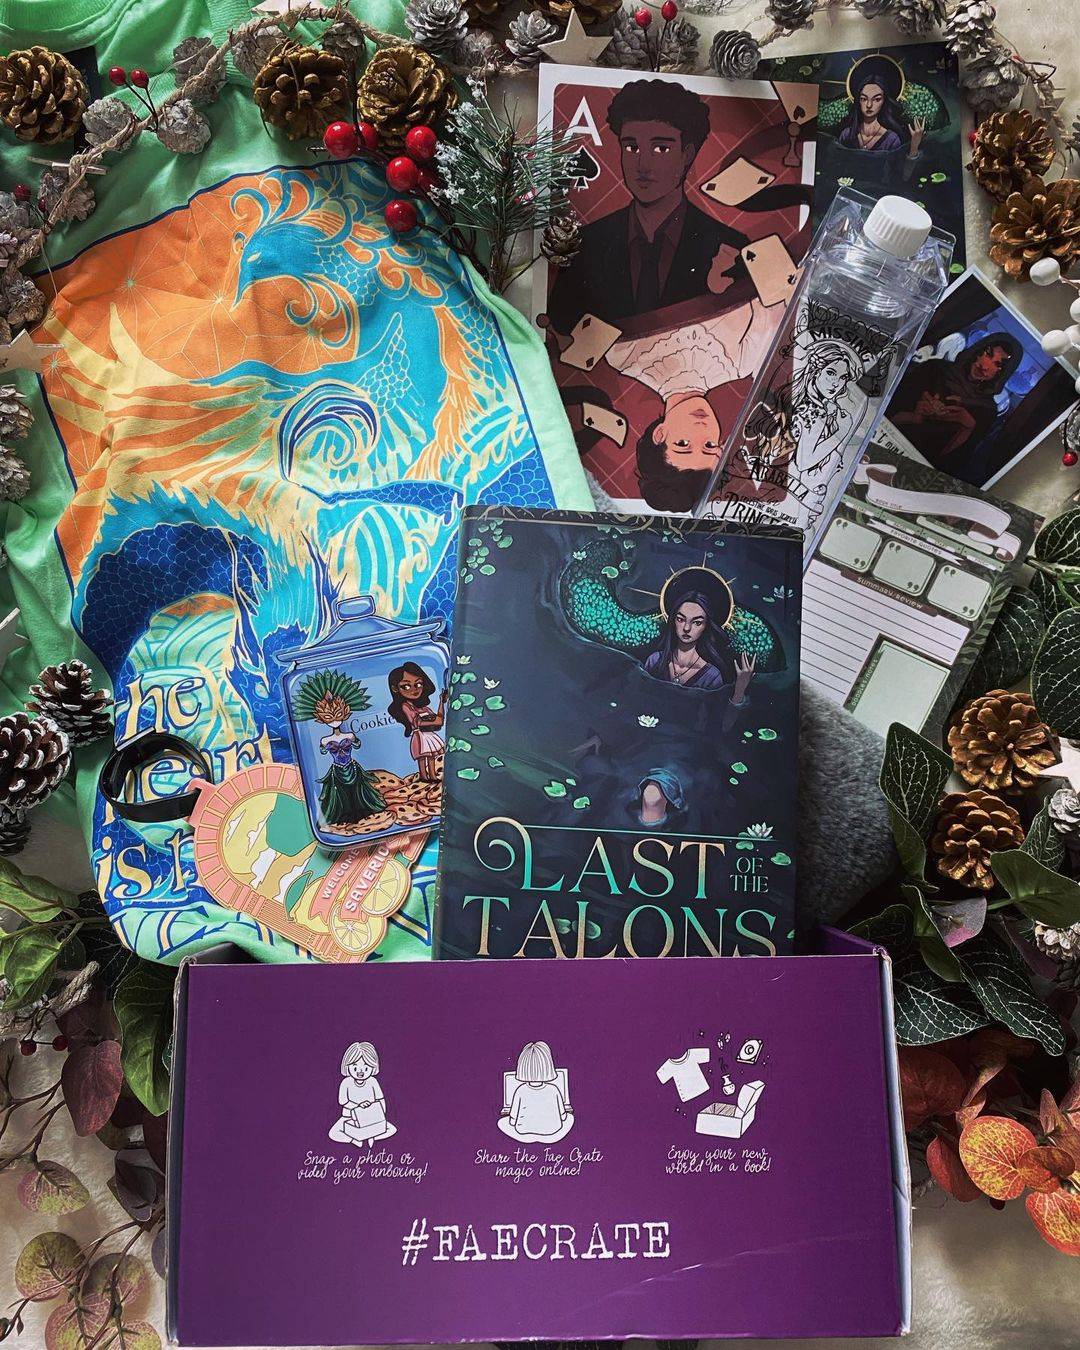 Janaury 2020 Spellbound box theme includes Sorcery of Thorns "Sir Fluffington" Pin, Magical Creatures Keychain, Fillory and Further Notebook, Wishing Tree Tea Towel, Parabatai Rune Sleeve, Six of Crows Polaroid, Hecate Magnus Bane Art, Chronicles of Narnia Shirt (Solitary and Seelie Crates only), E-Book Download of When Wishes Bleed by Casey L. Bond, and Spell Hacker by M. K. England. 